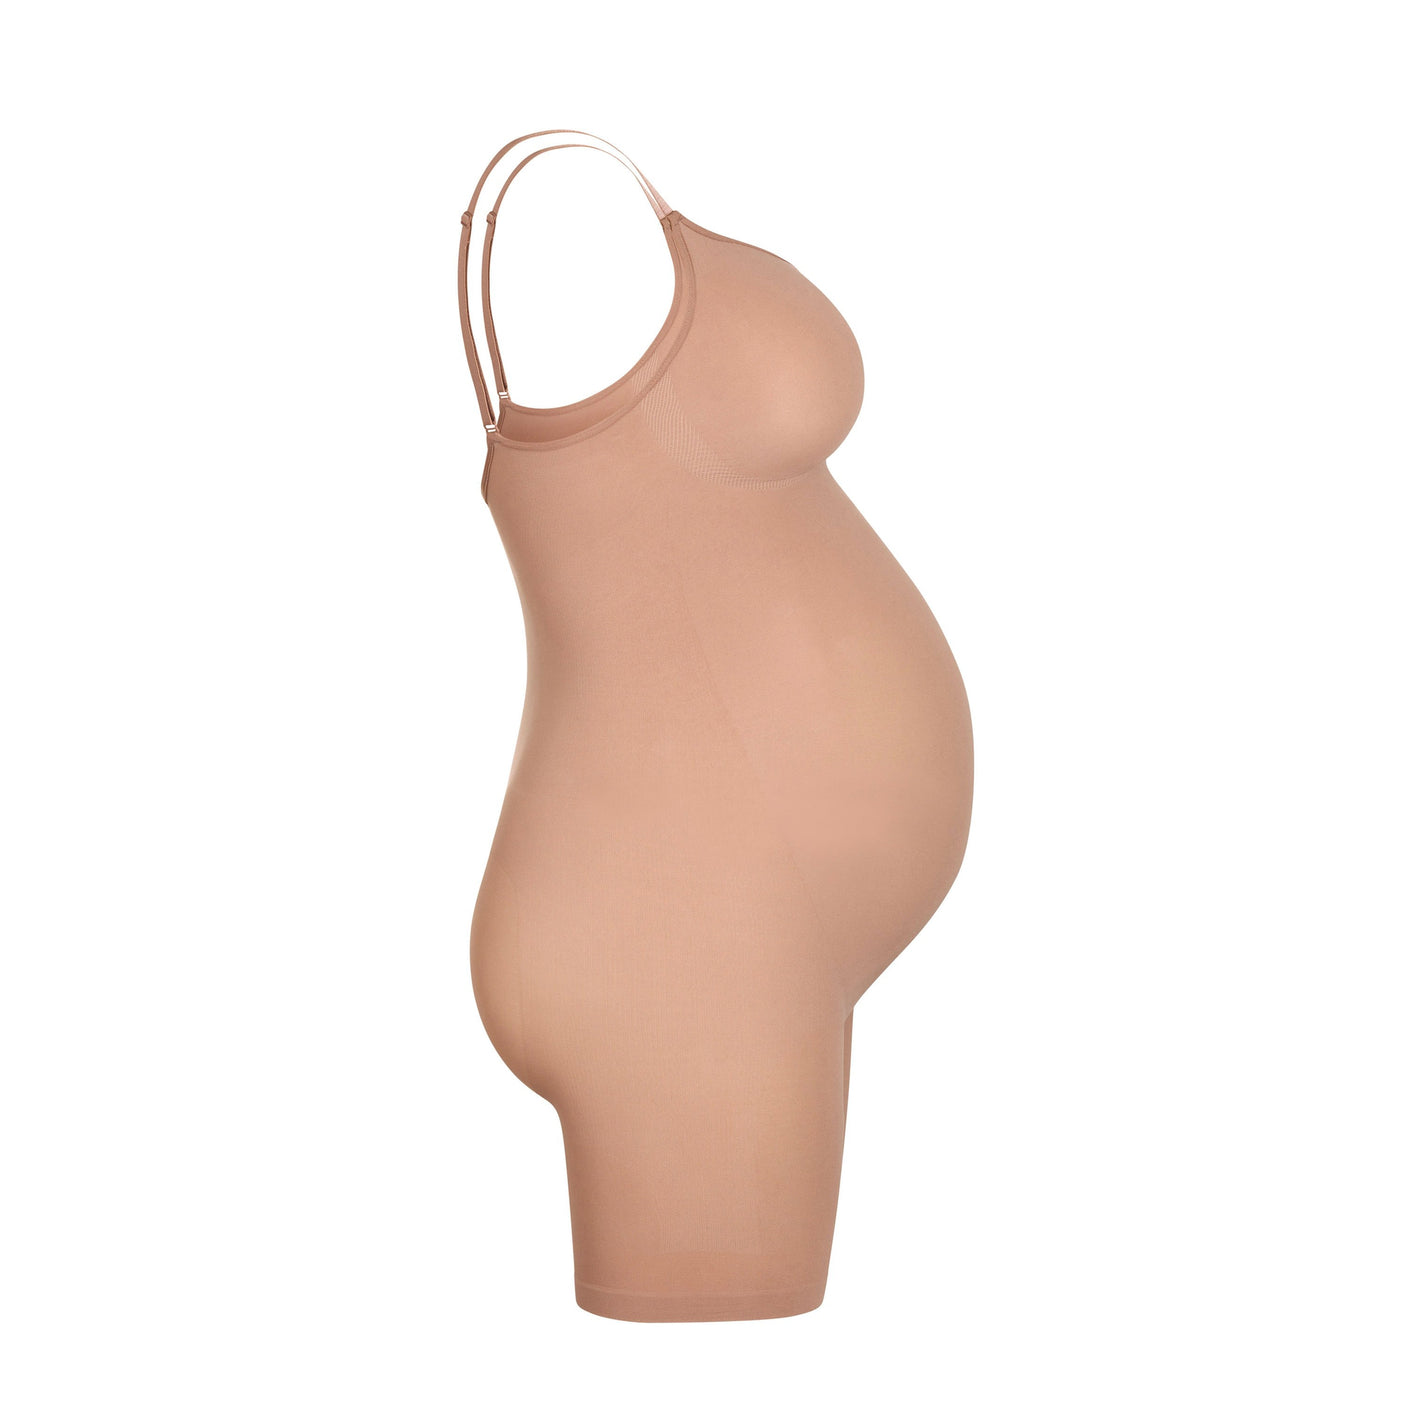 Skims Maternity Shapewear Try-On: Unbelievable Fit for Pregnant Women